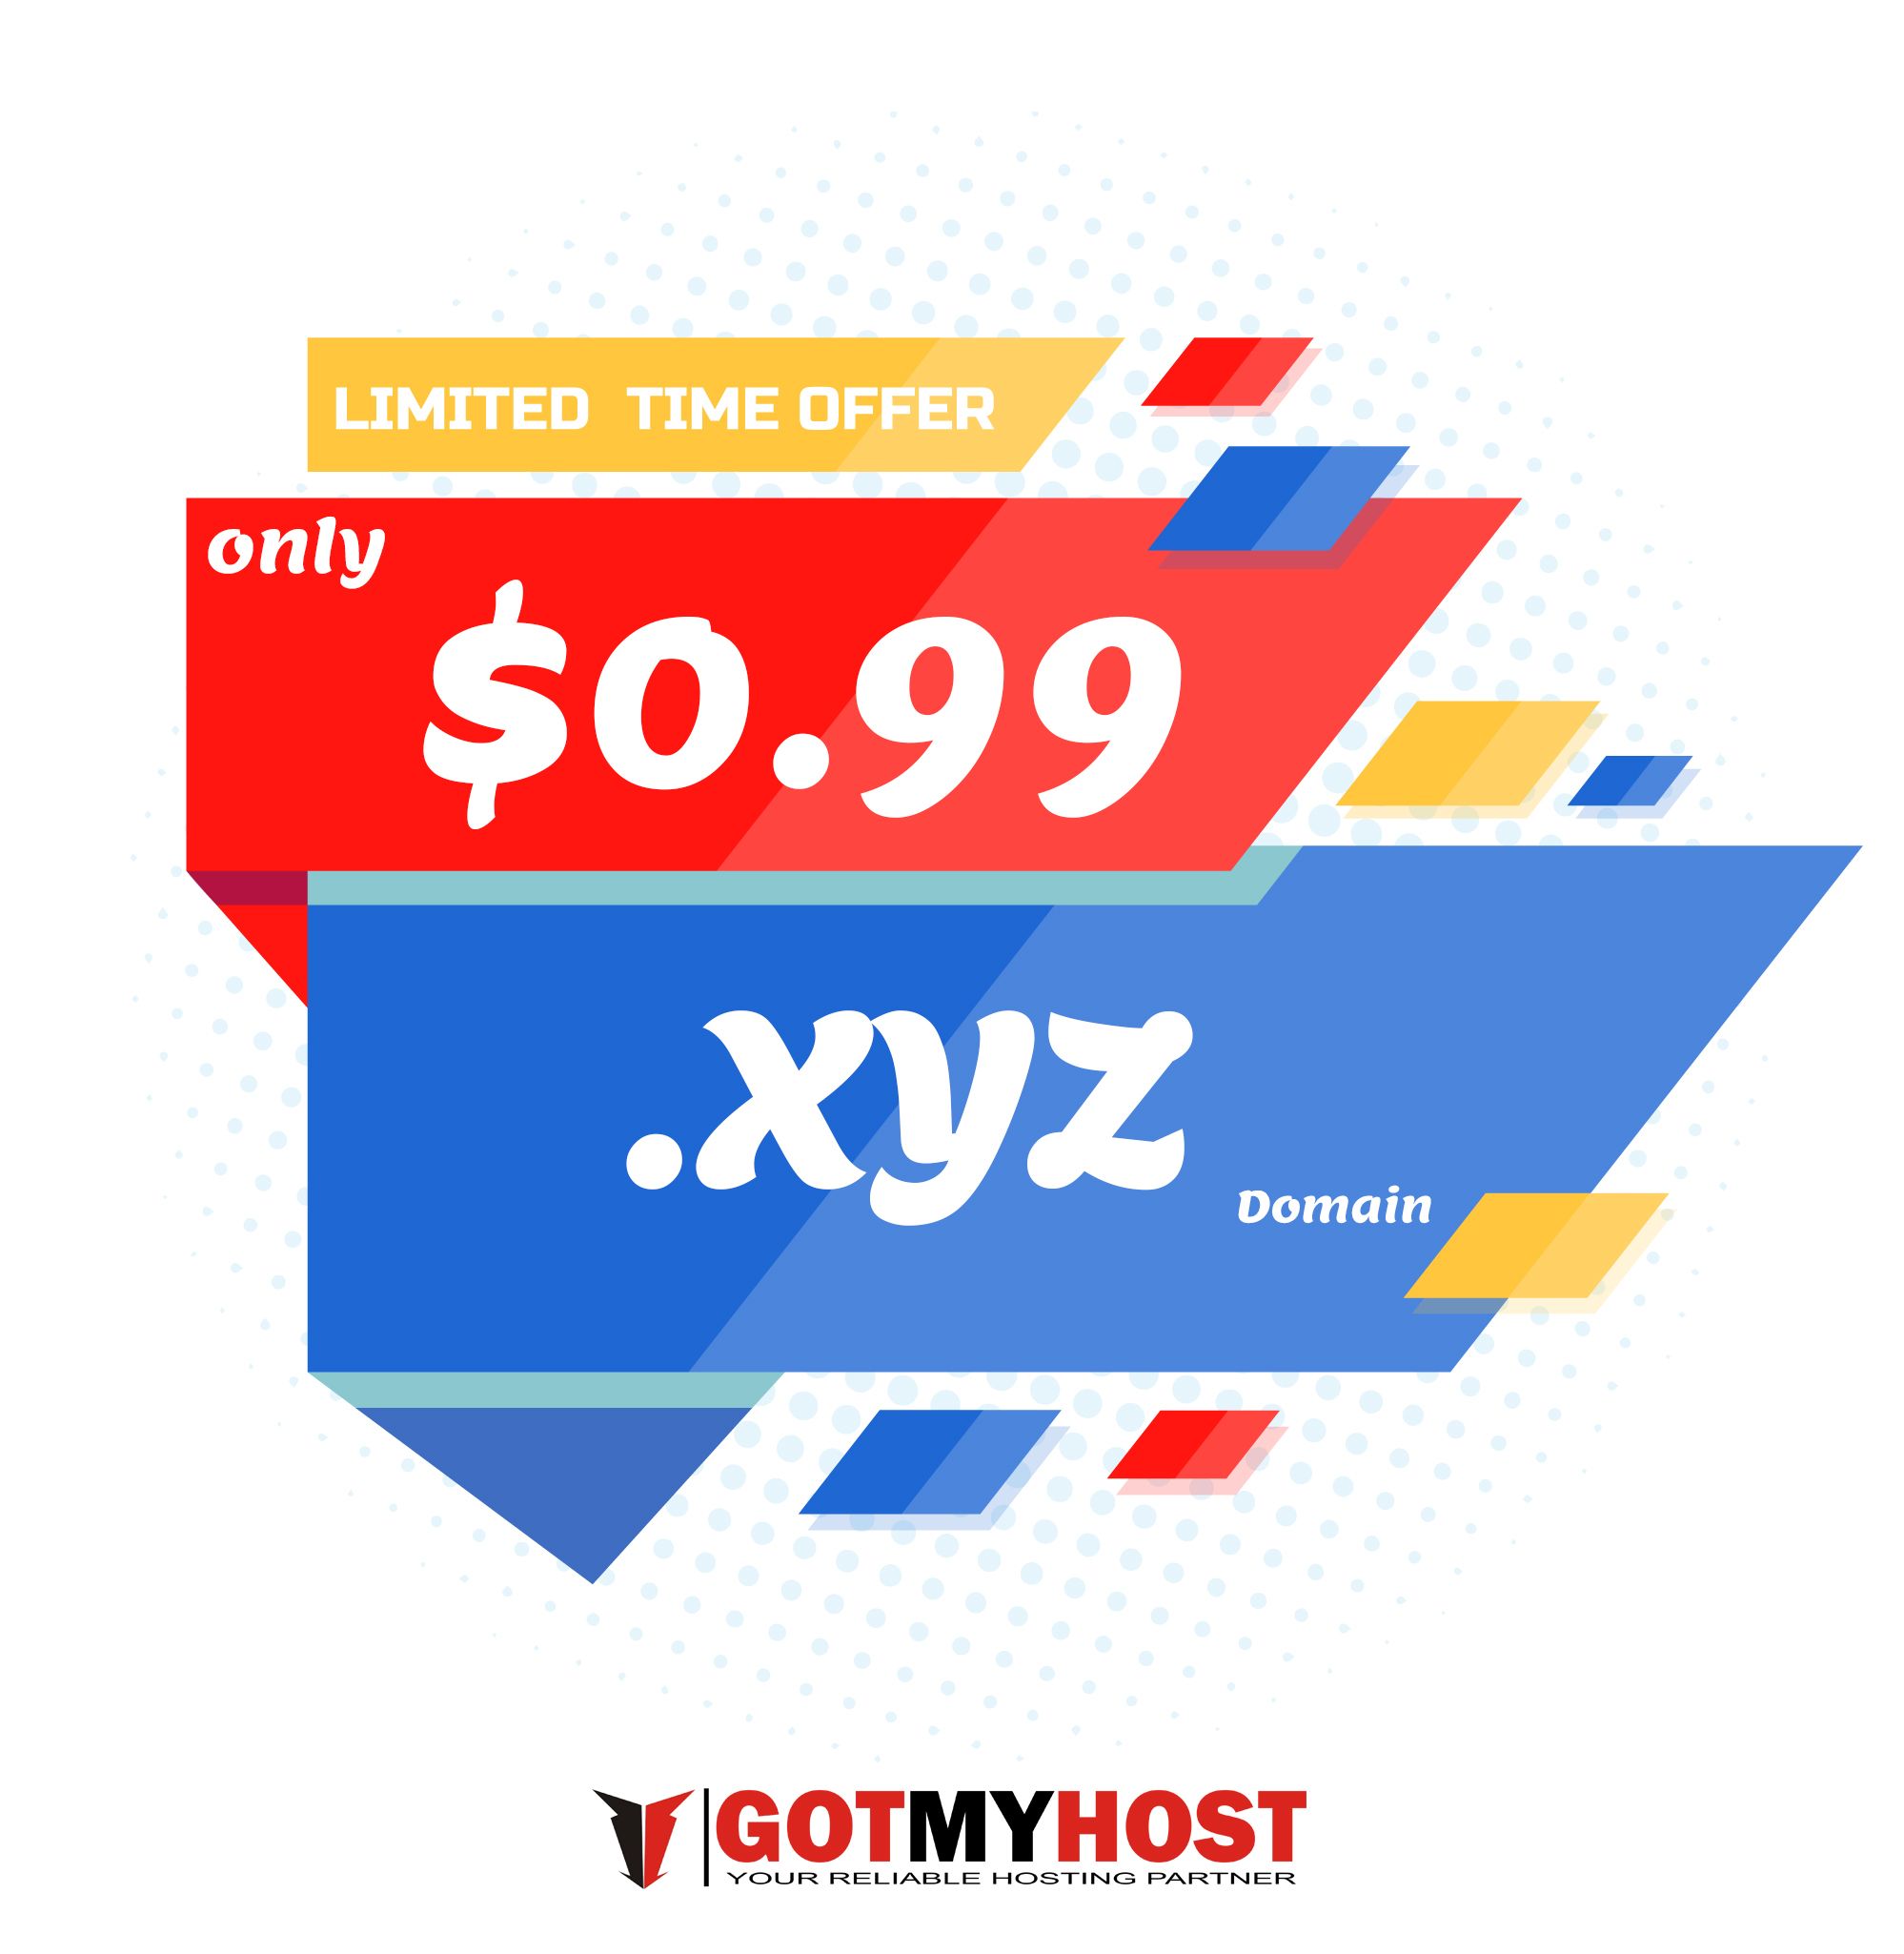 What Is An Xyz Domain